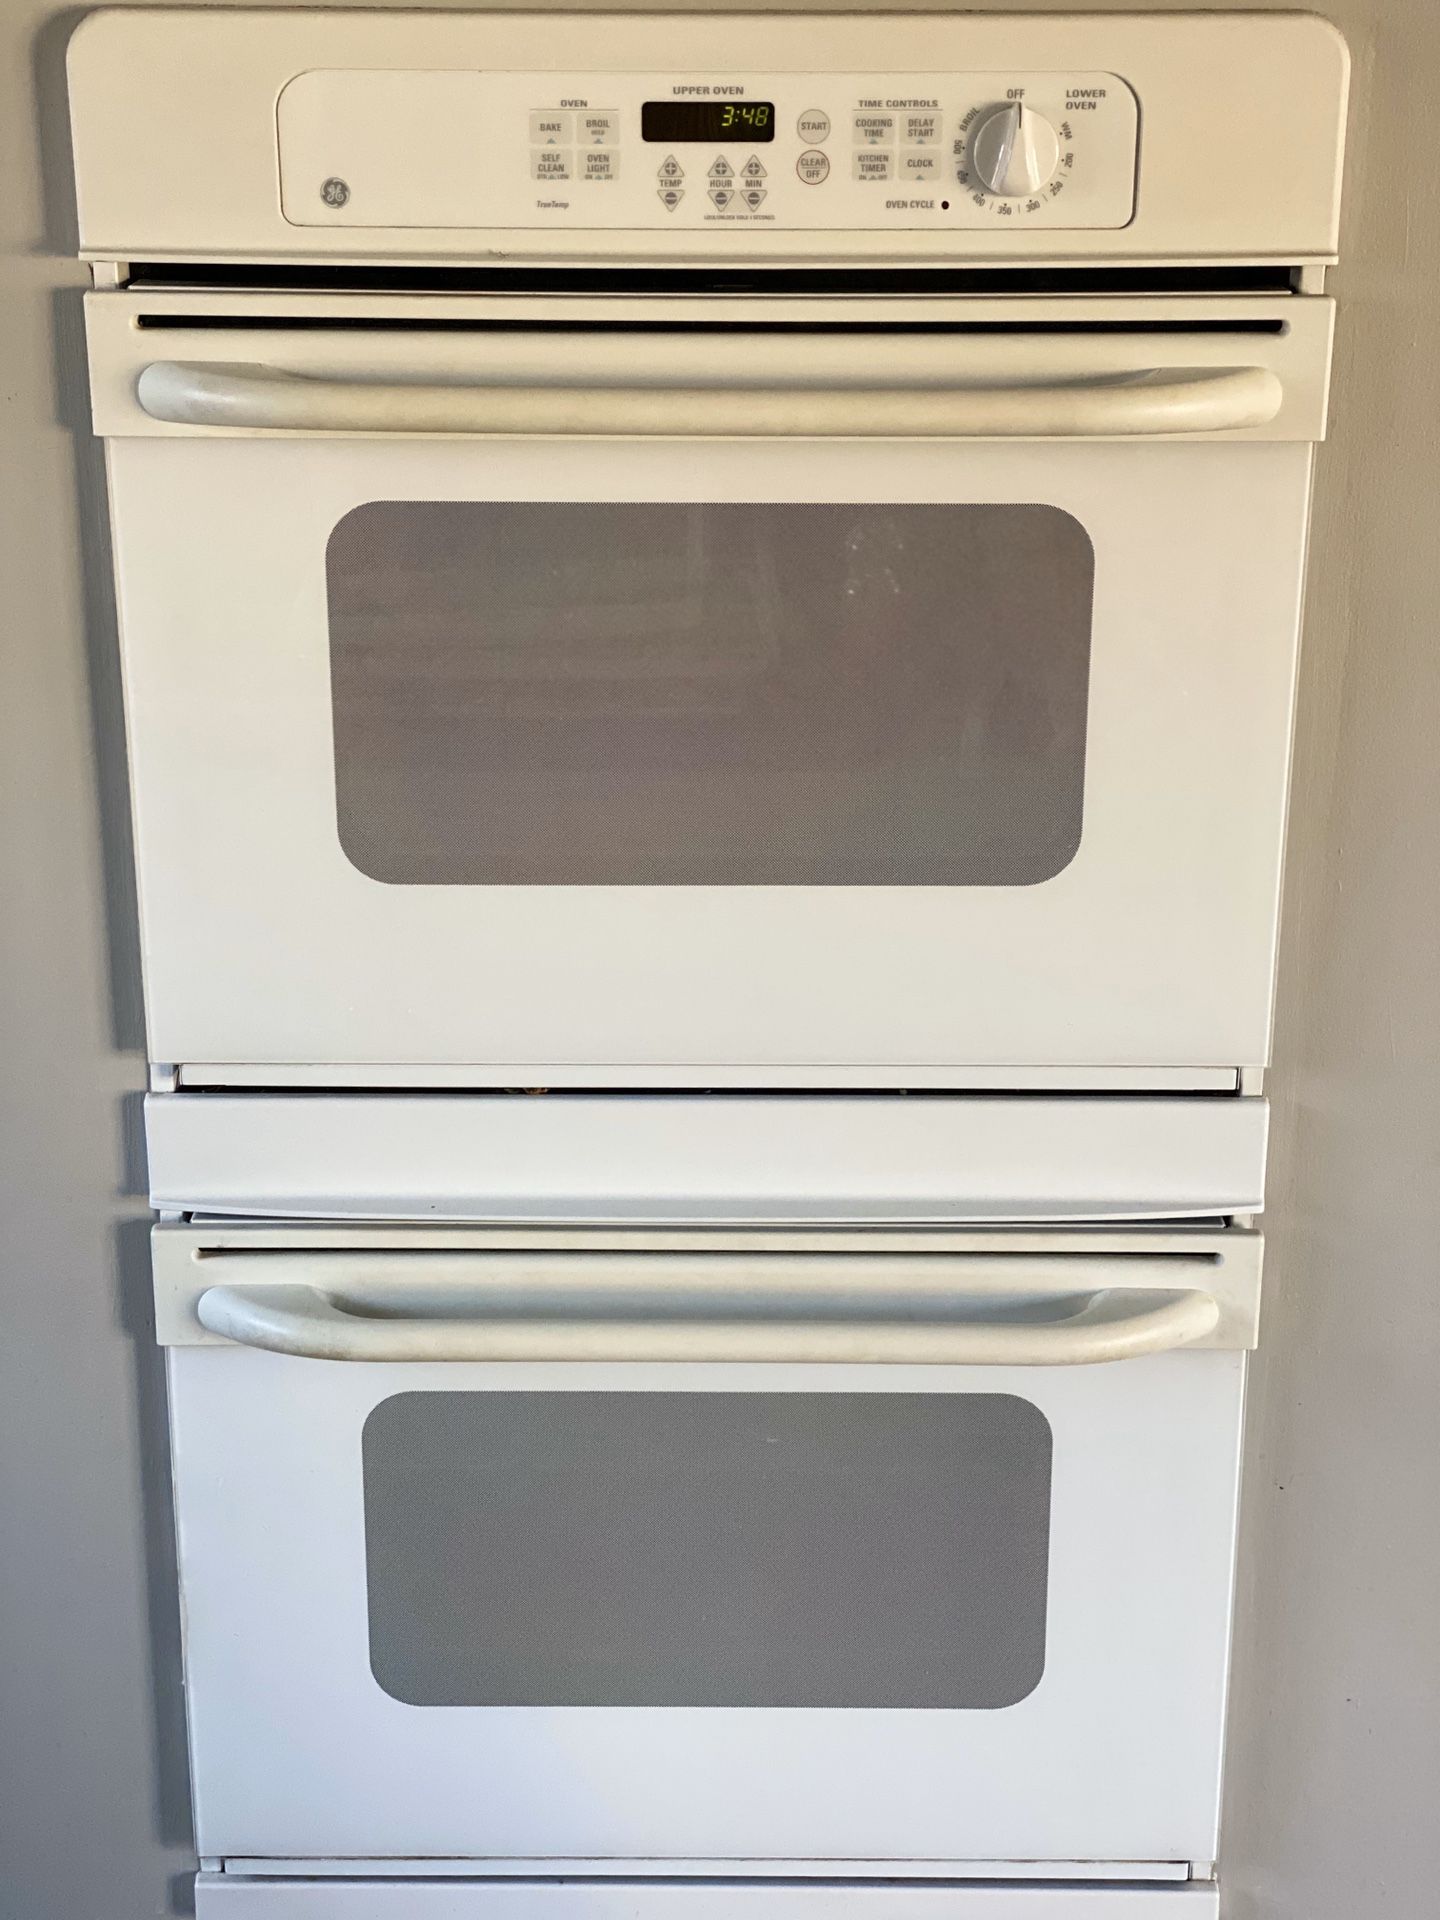 30” white double convection oven